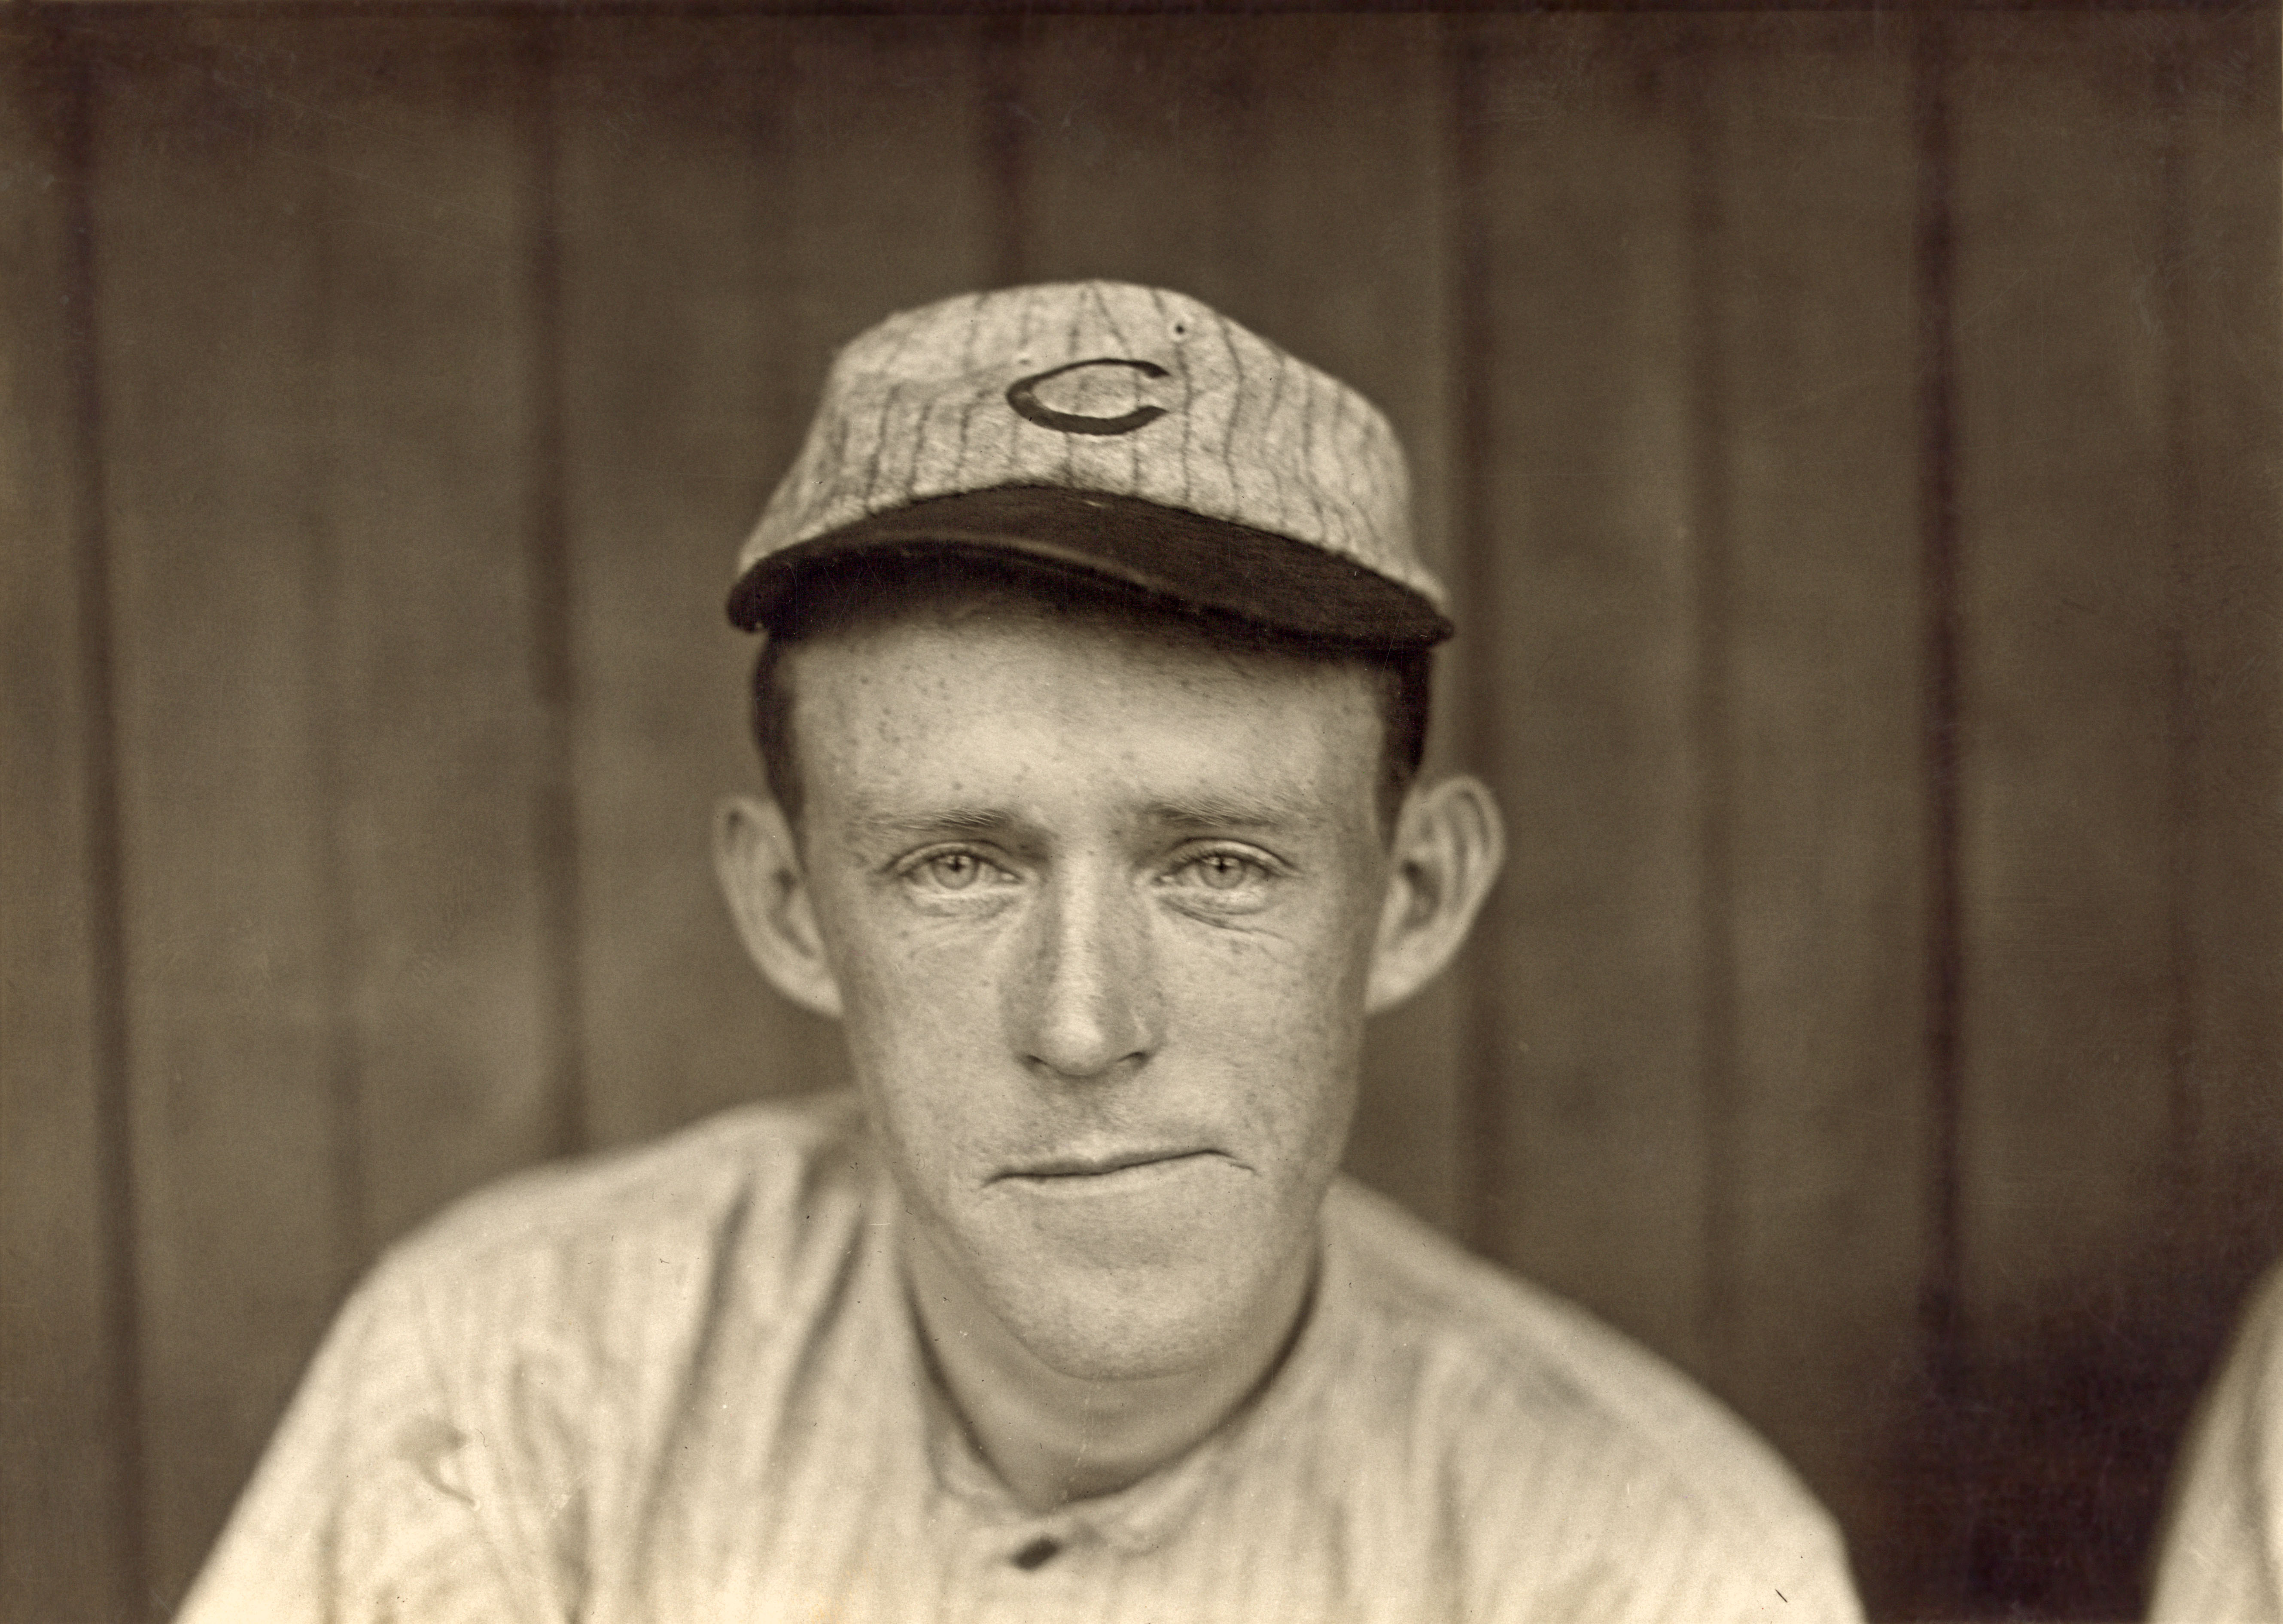 Extra Innings: The Johnny Evers Story | A New York Minute In History